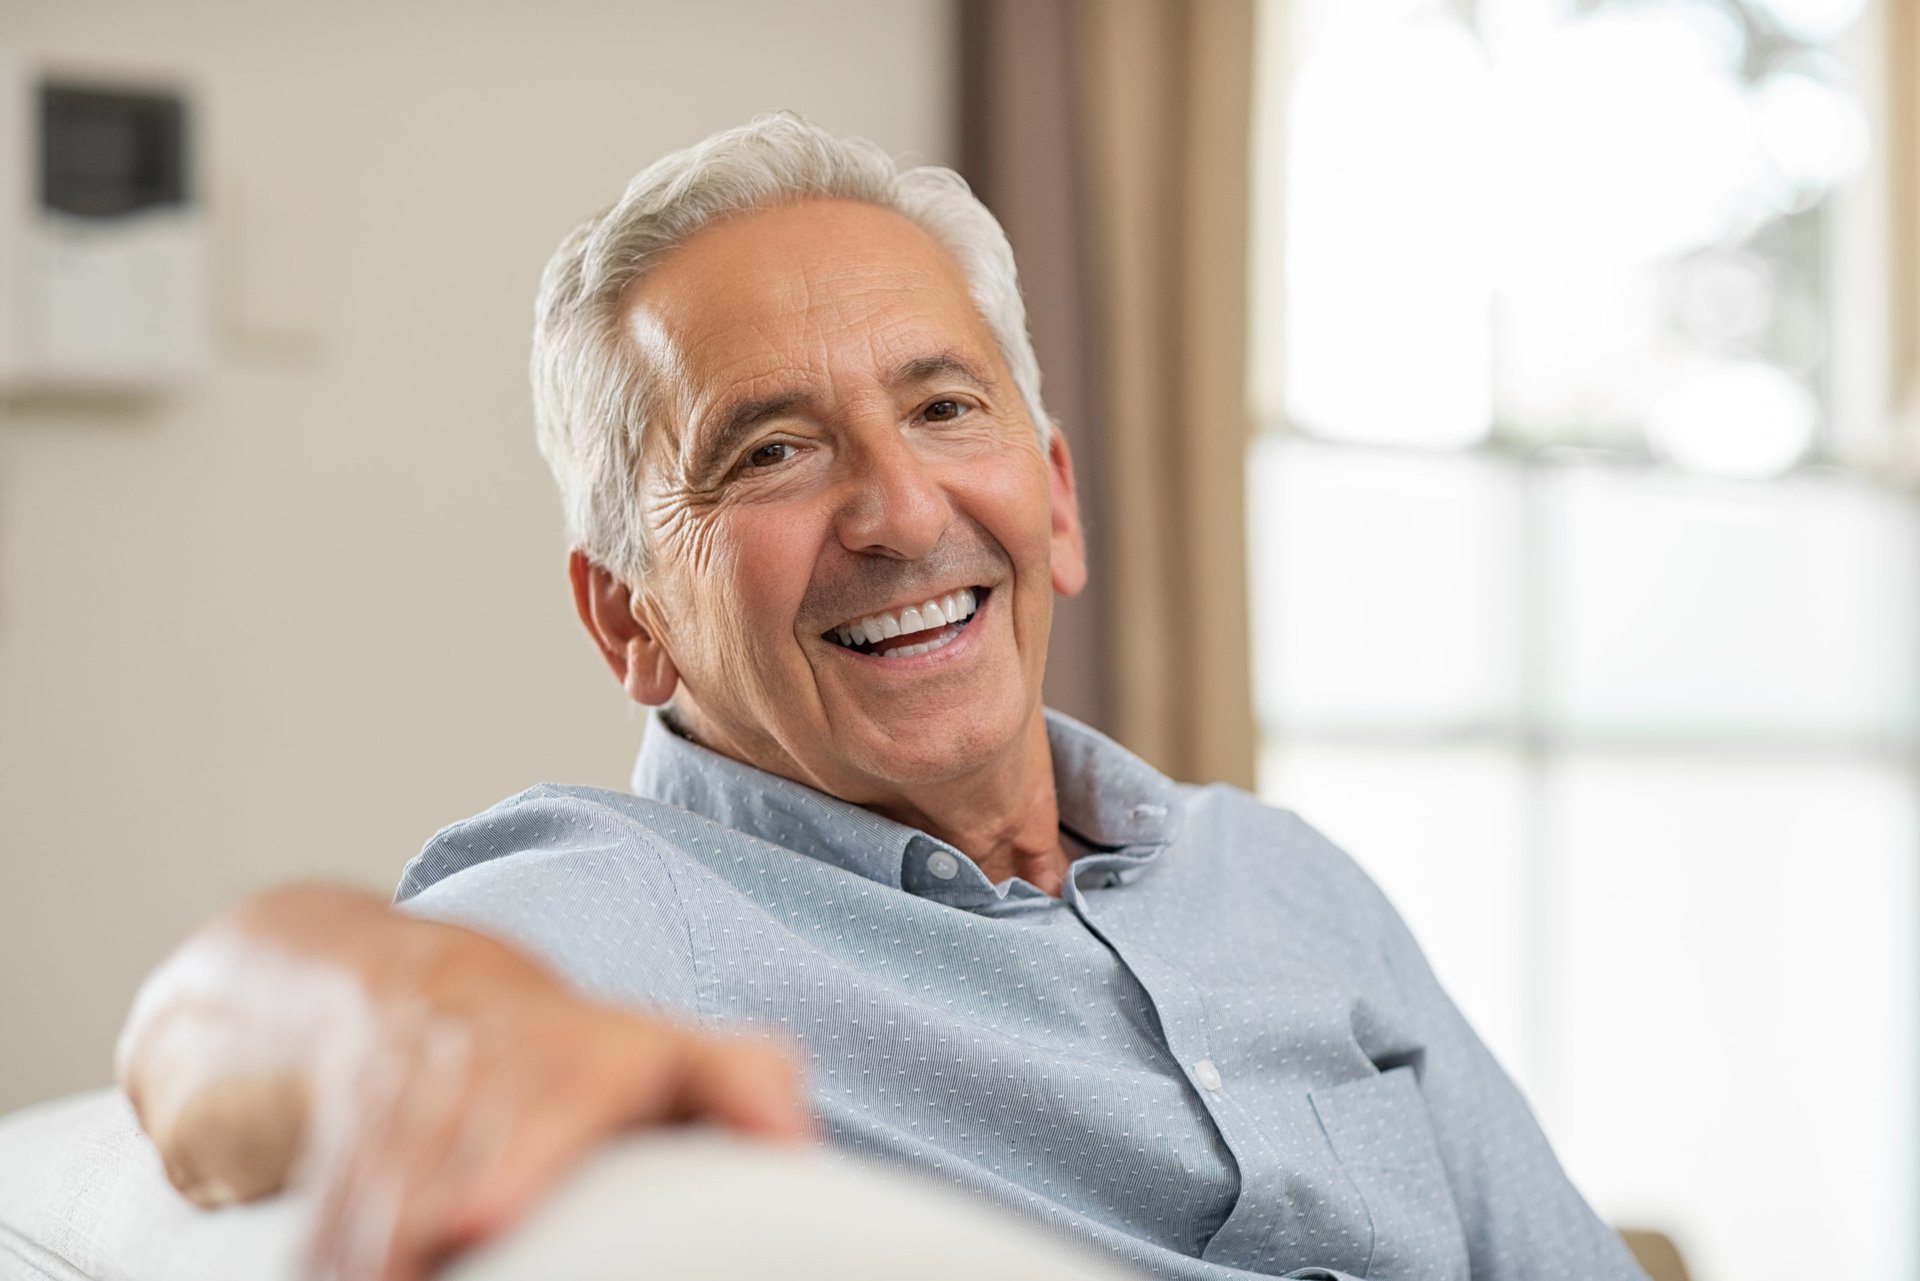 Man smiling on couch